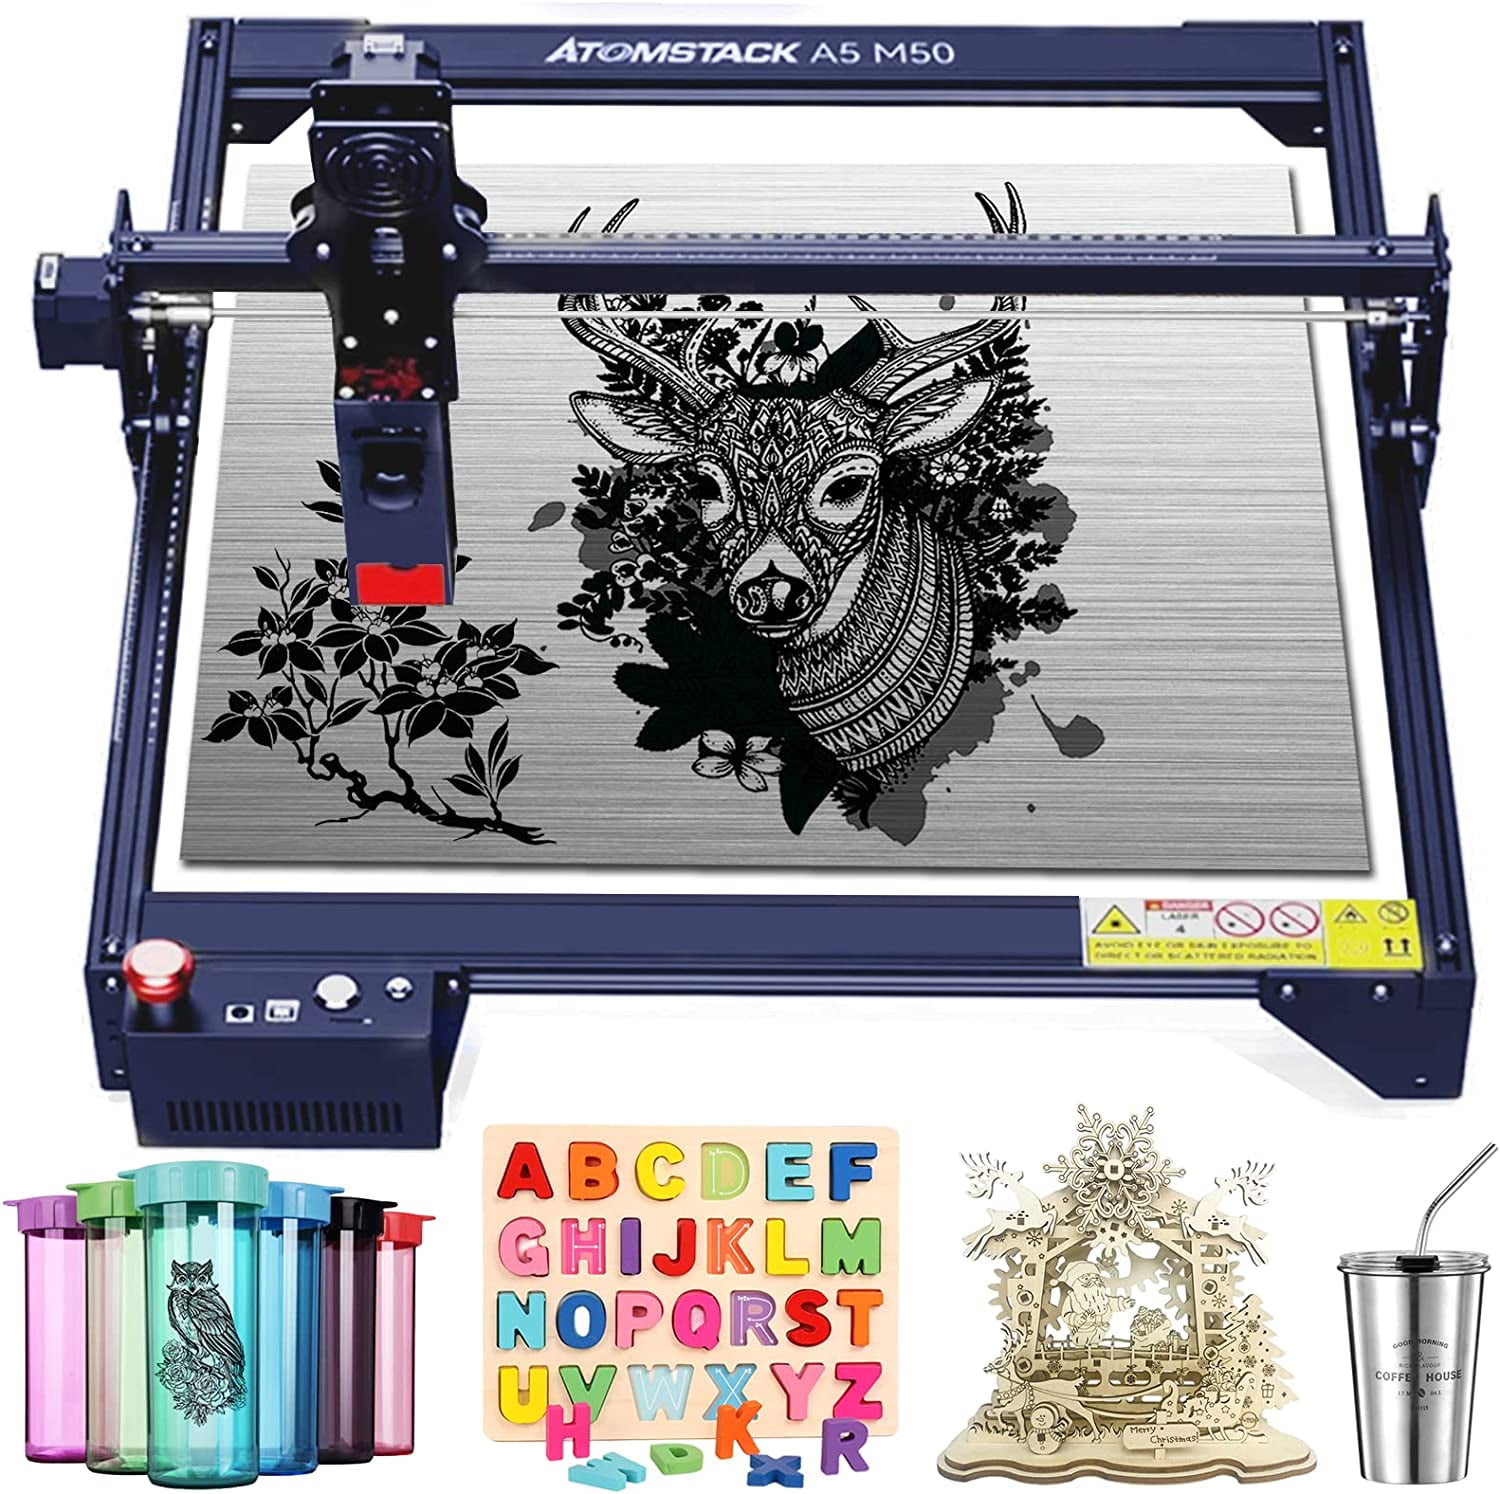 MR.CARVE C1 Laser Engraver 5W Blue Light Laser Cutting and Carving Machine  with Auto Focus